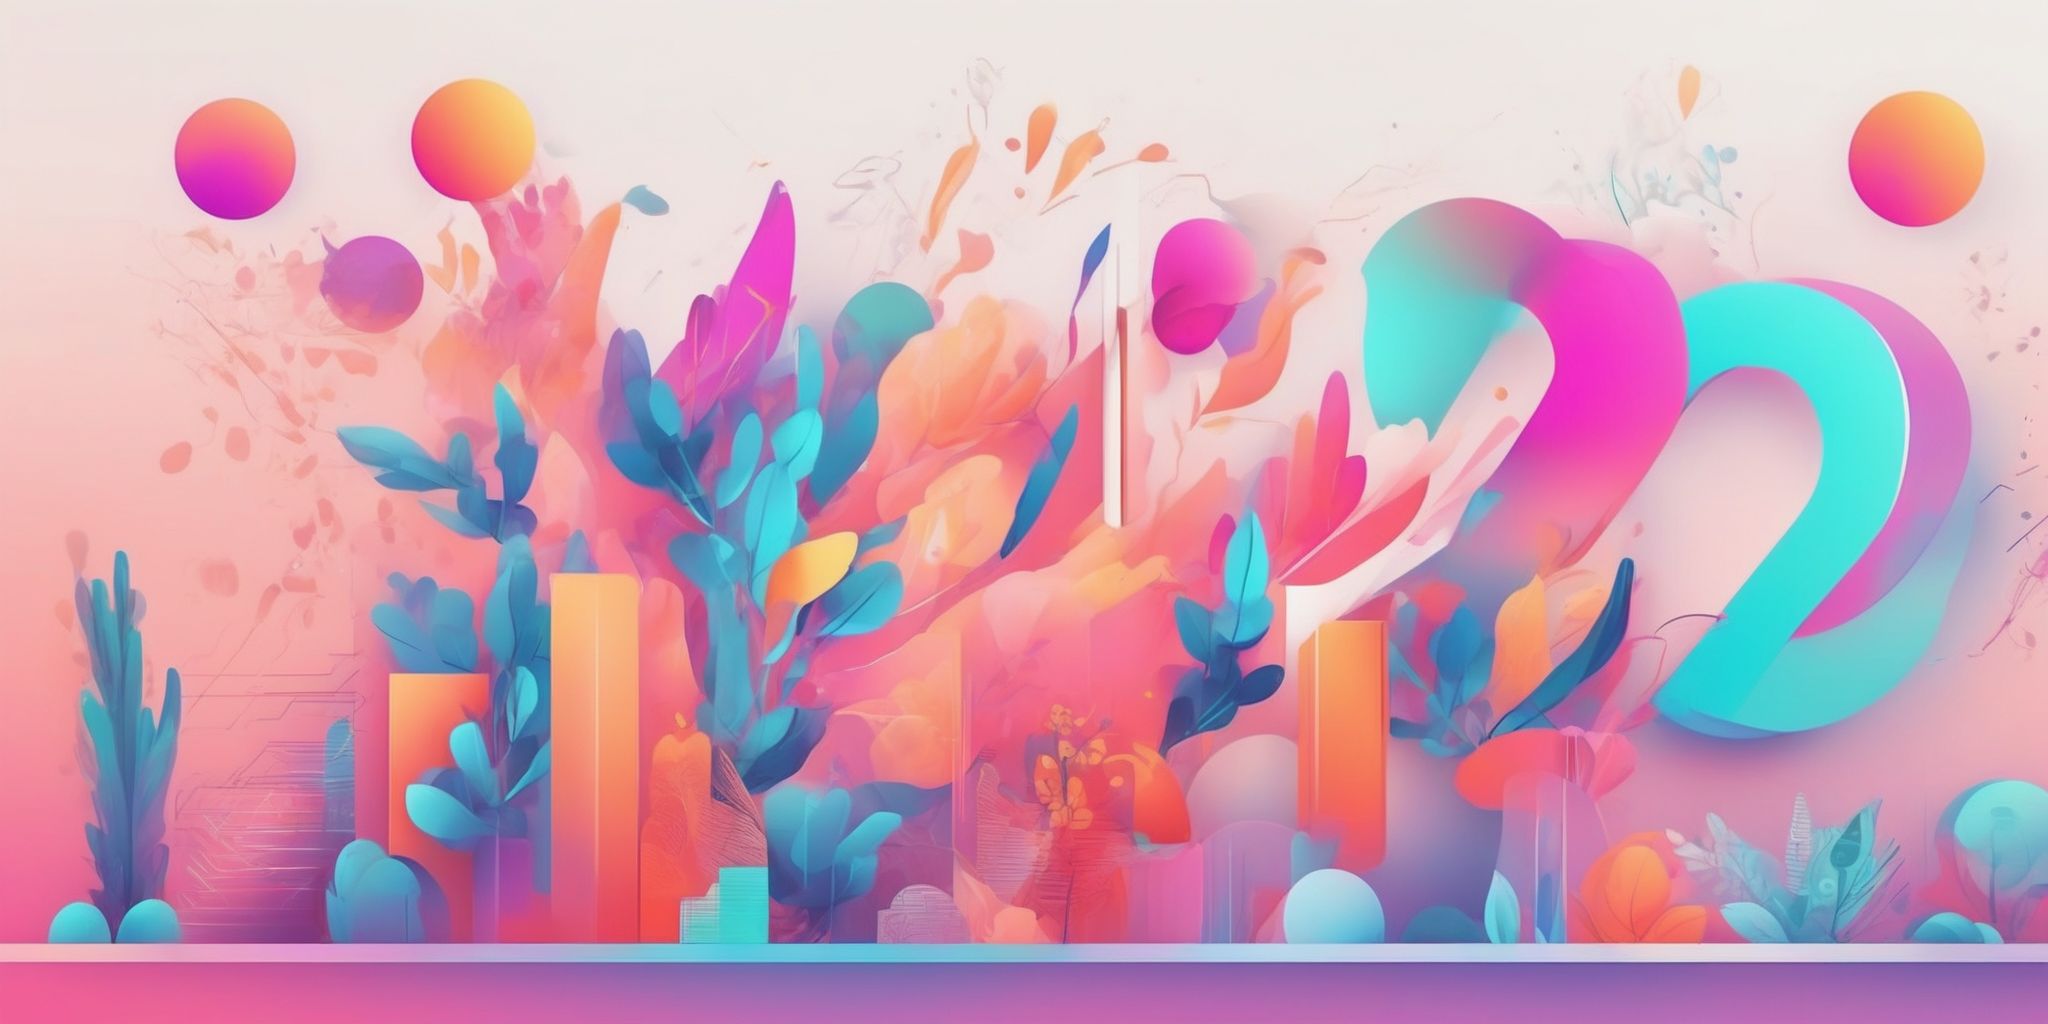 Trends 2022 in illustration style with gradients and white background